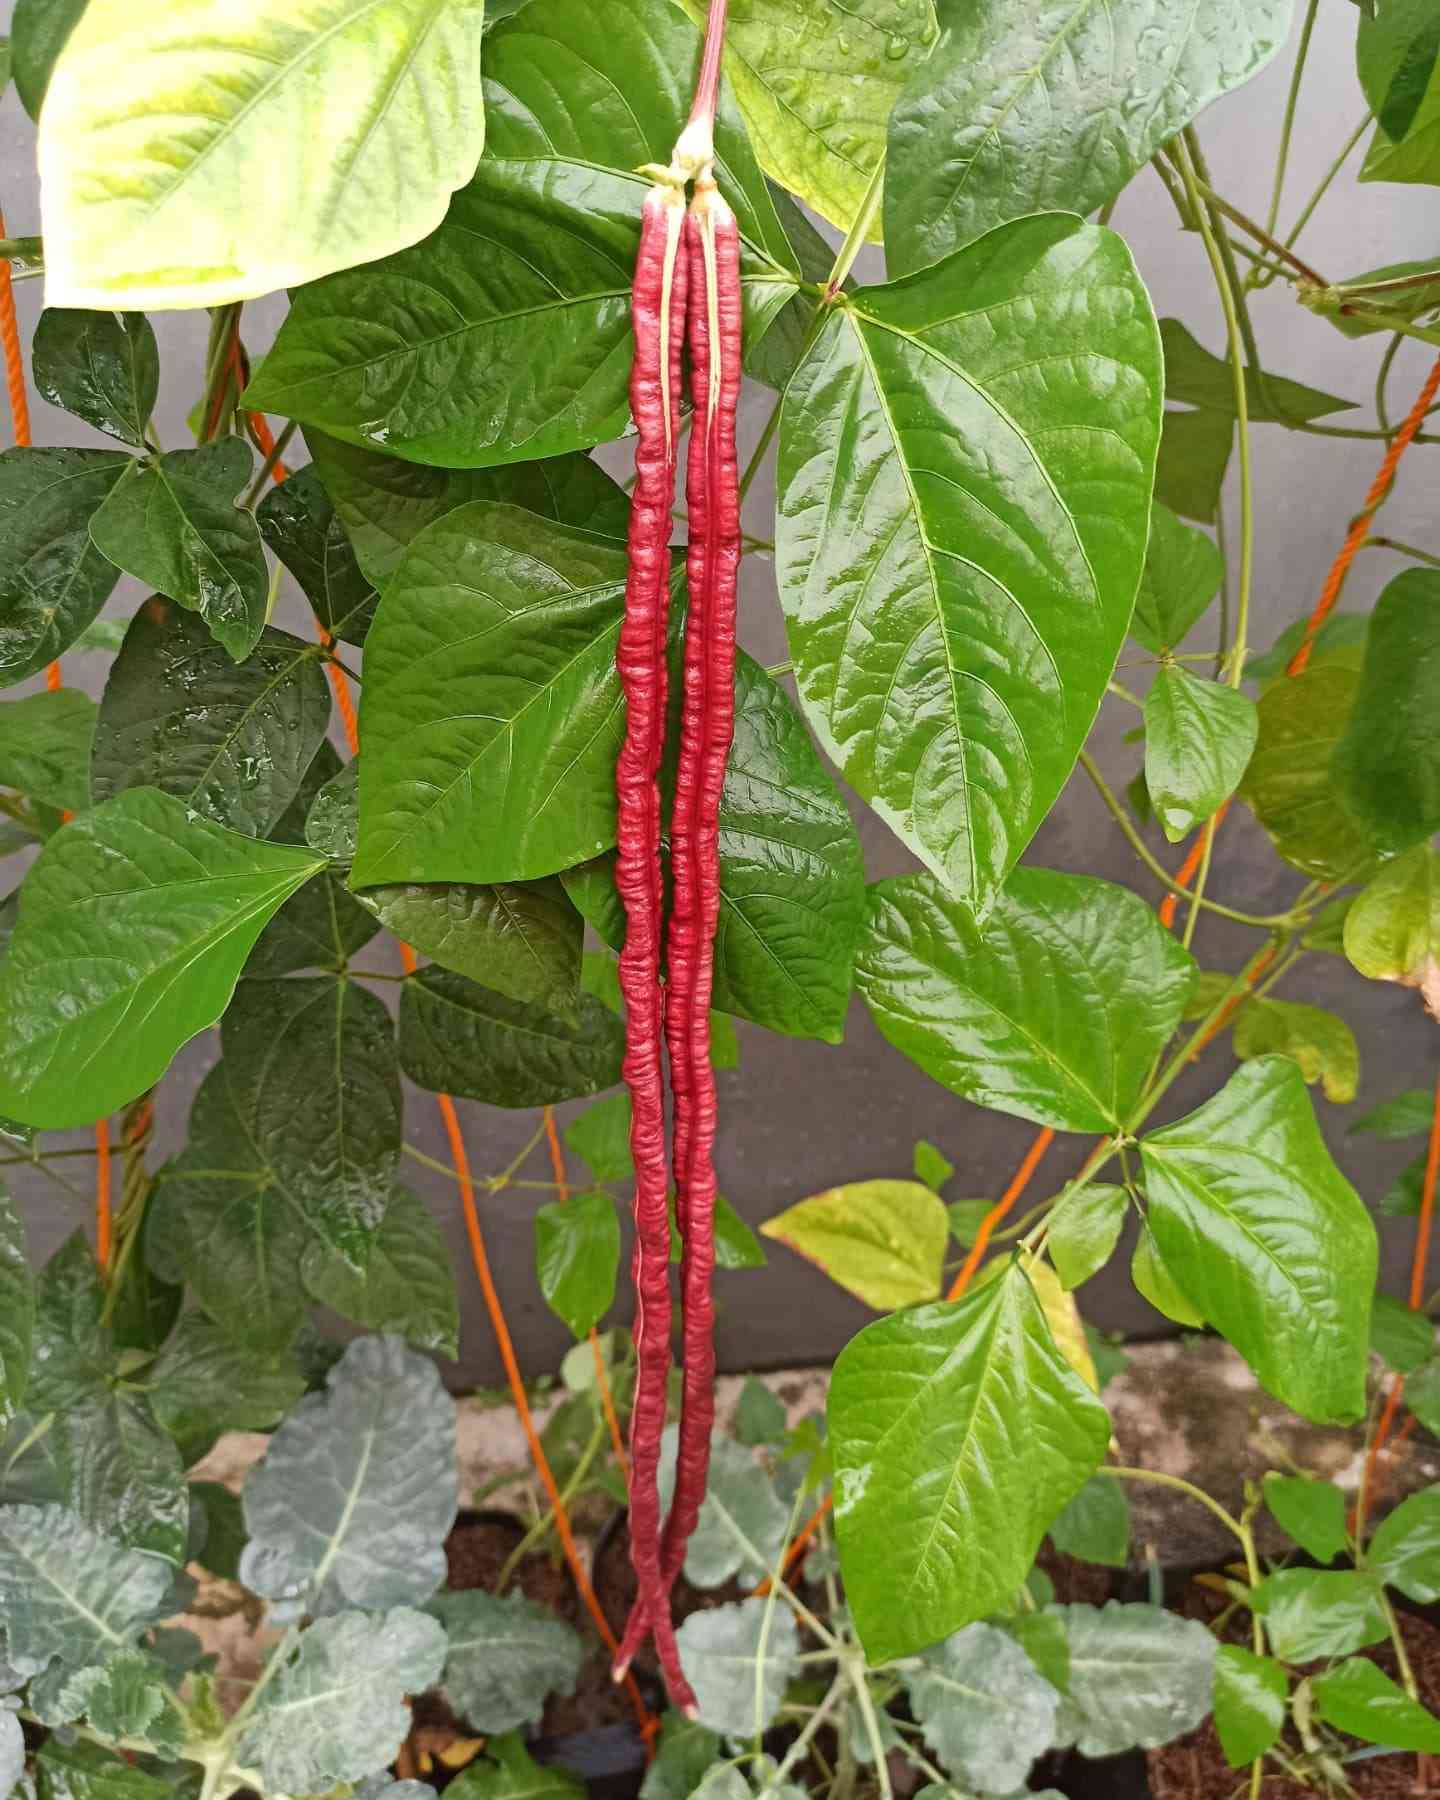 Bean Seeds-Mix Long Bean Seeds 10g Snake Yard-Long Asparagus Bean Red Noodle Pole Bean Garden Vegetable Organic Green Fresh for Planting Outside Door Cooking Dish Taste Sweet Delicious 